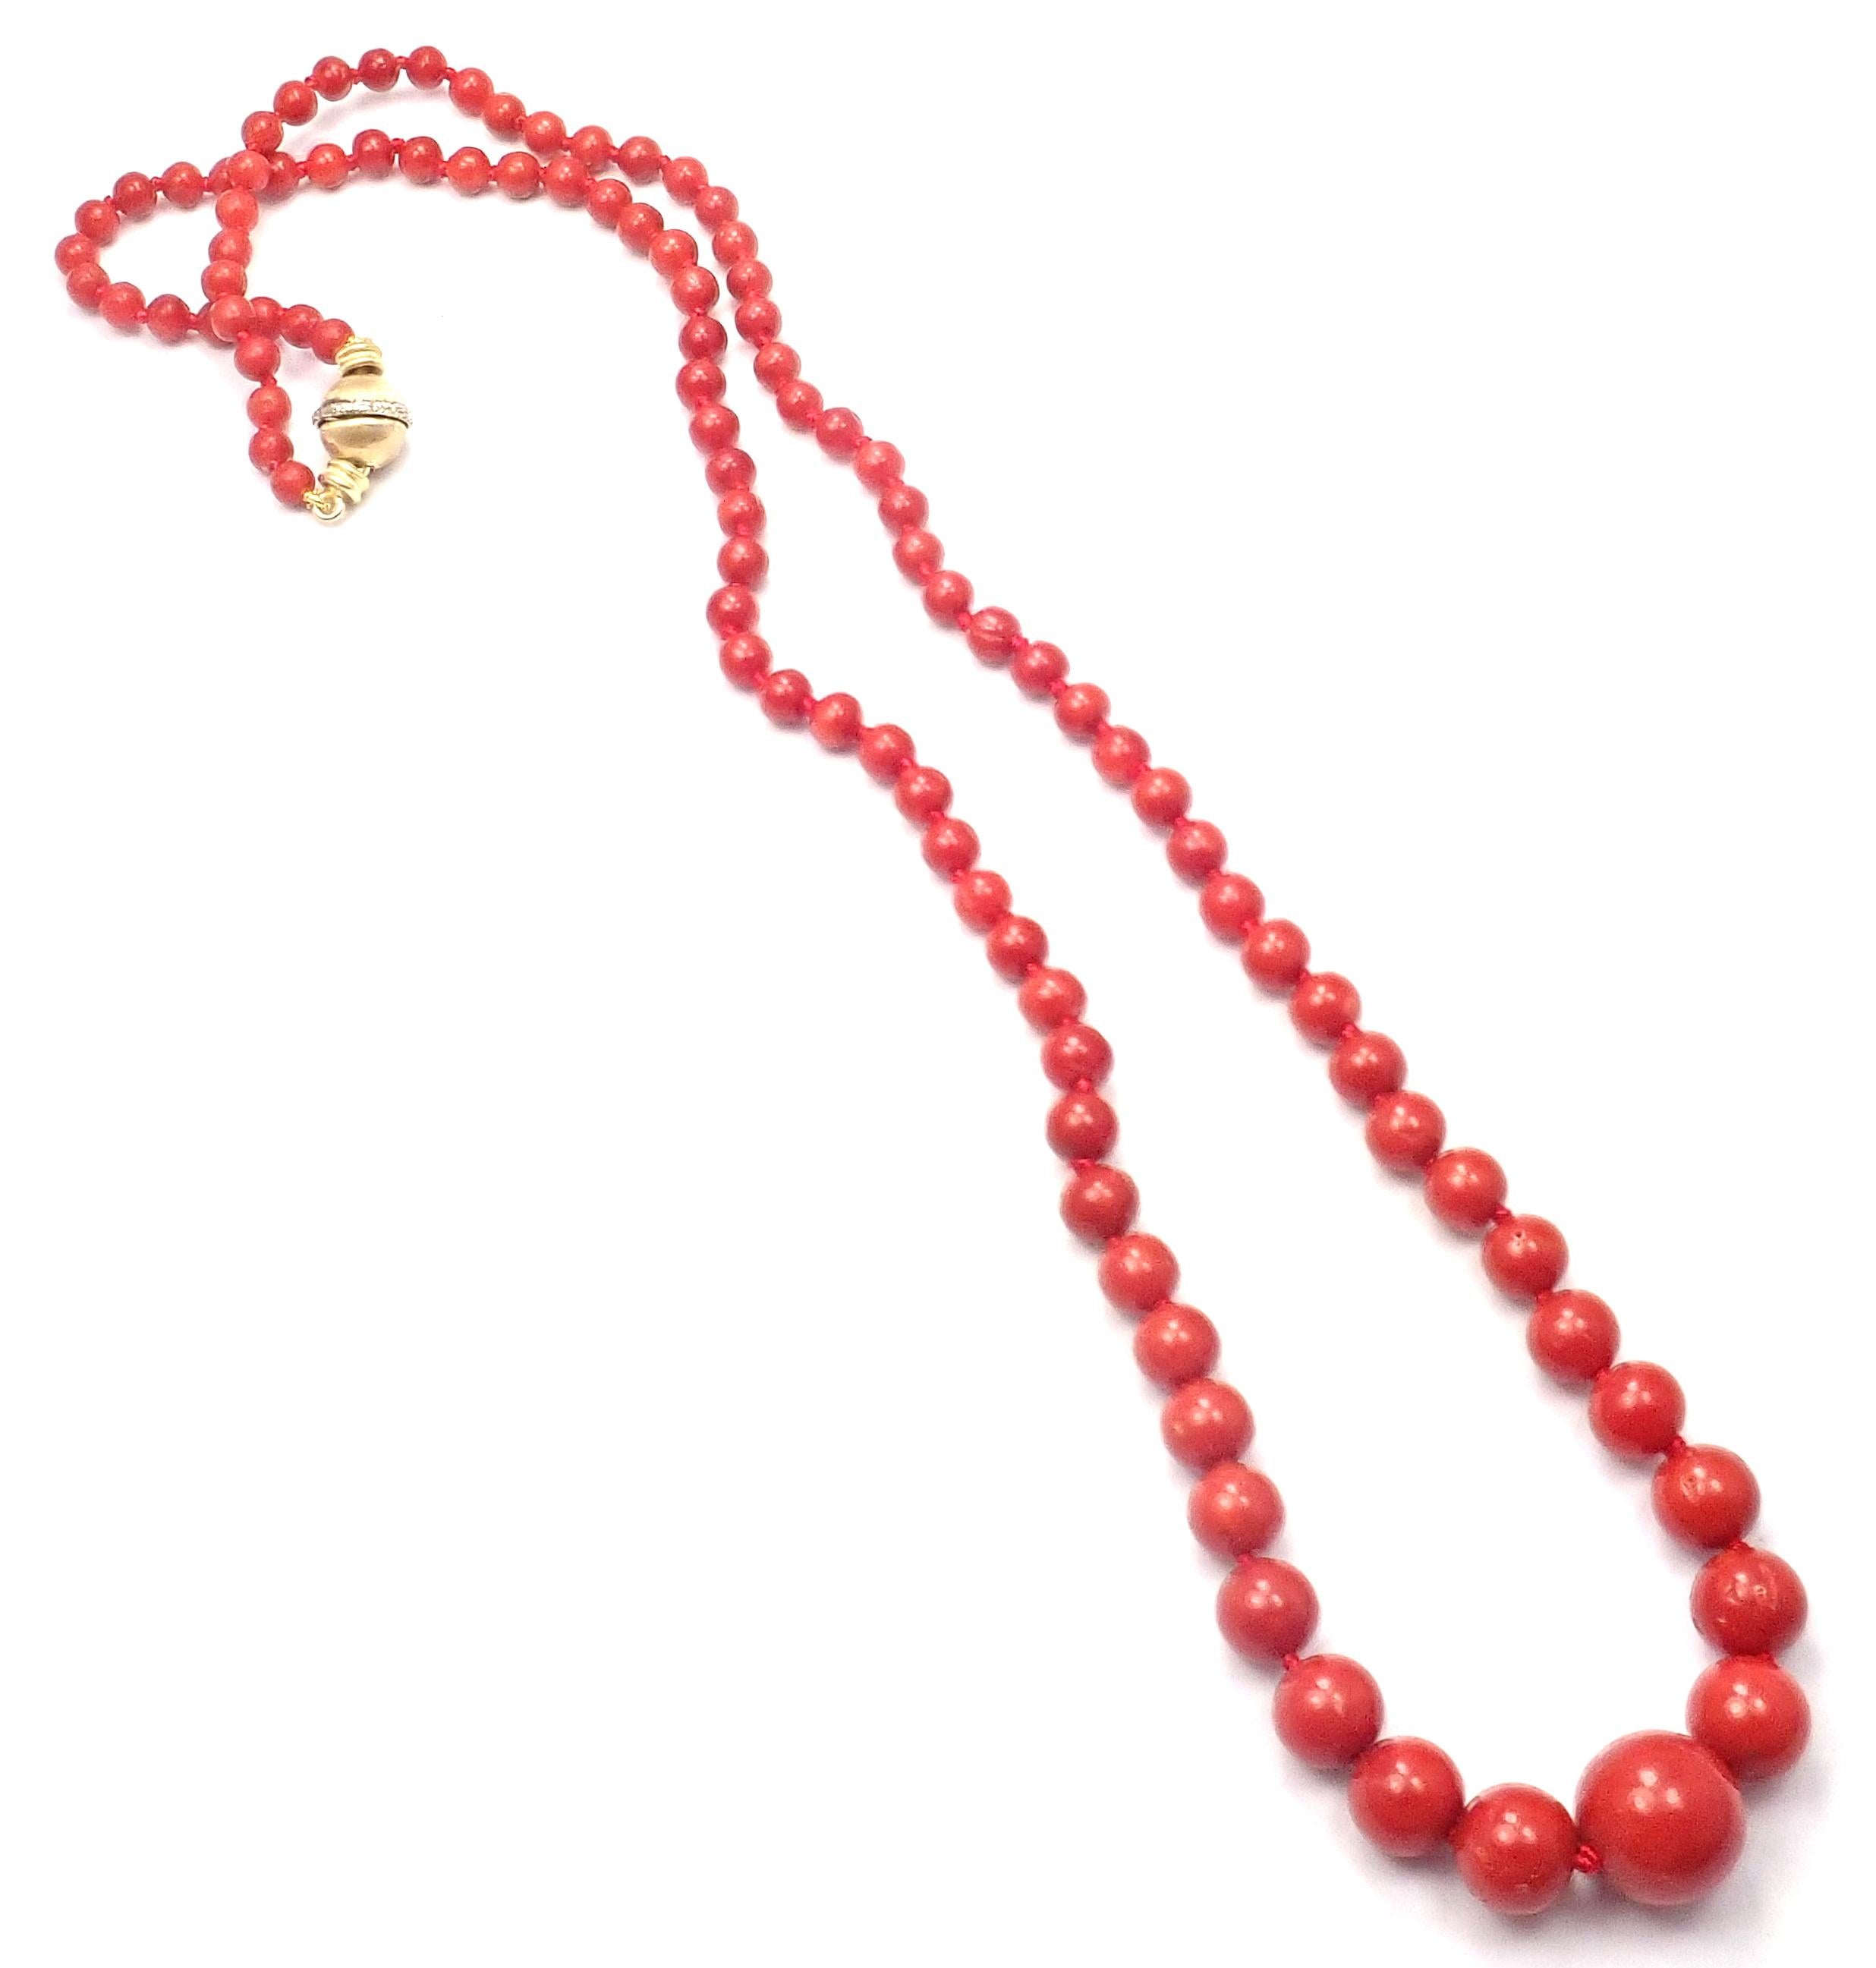 18k Yellow Gold Vintage Graduated Red Coral Bead Necklace by Mario Buccellati.
With 100 red color coral stones from 13mm to 5mm
Details:
Length: 24